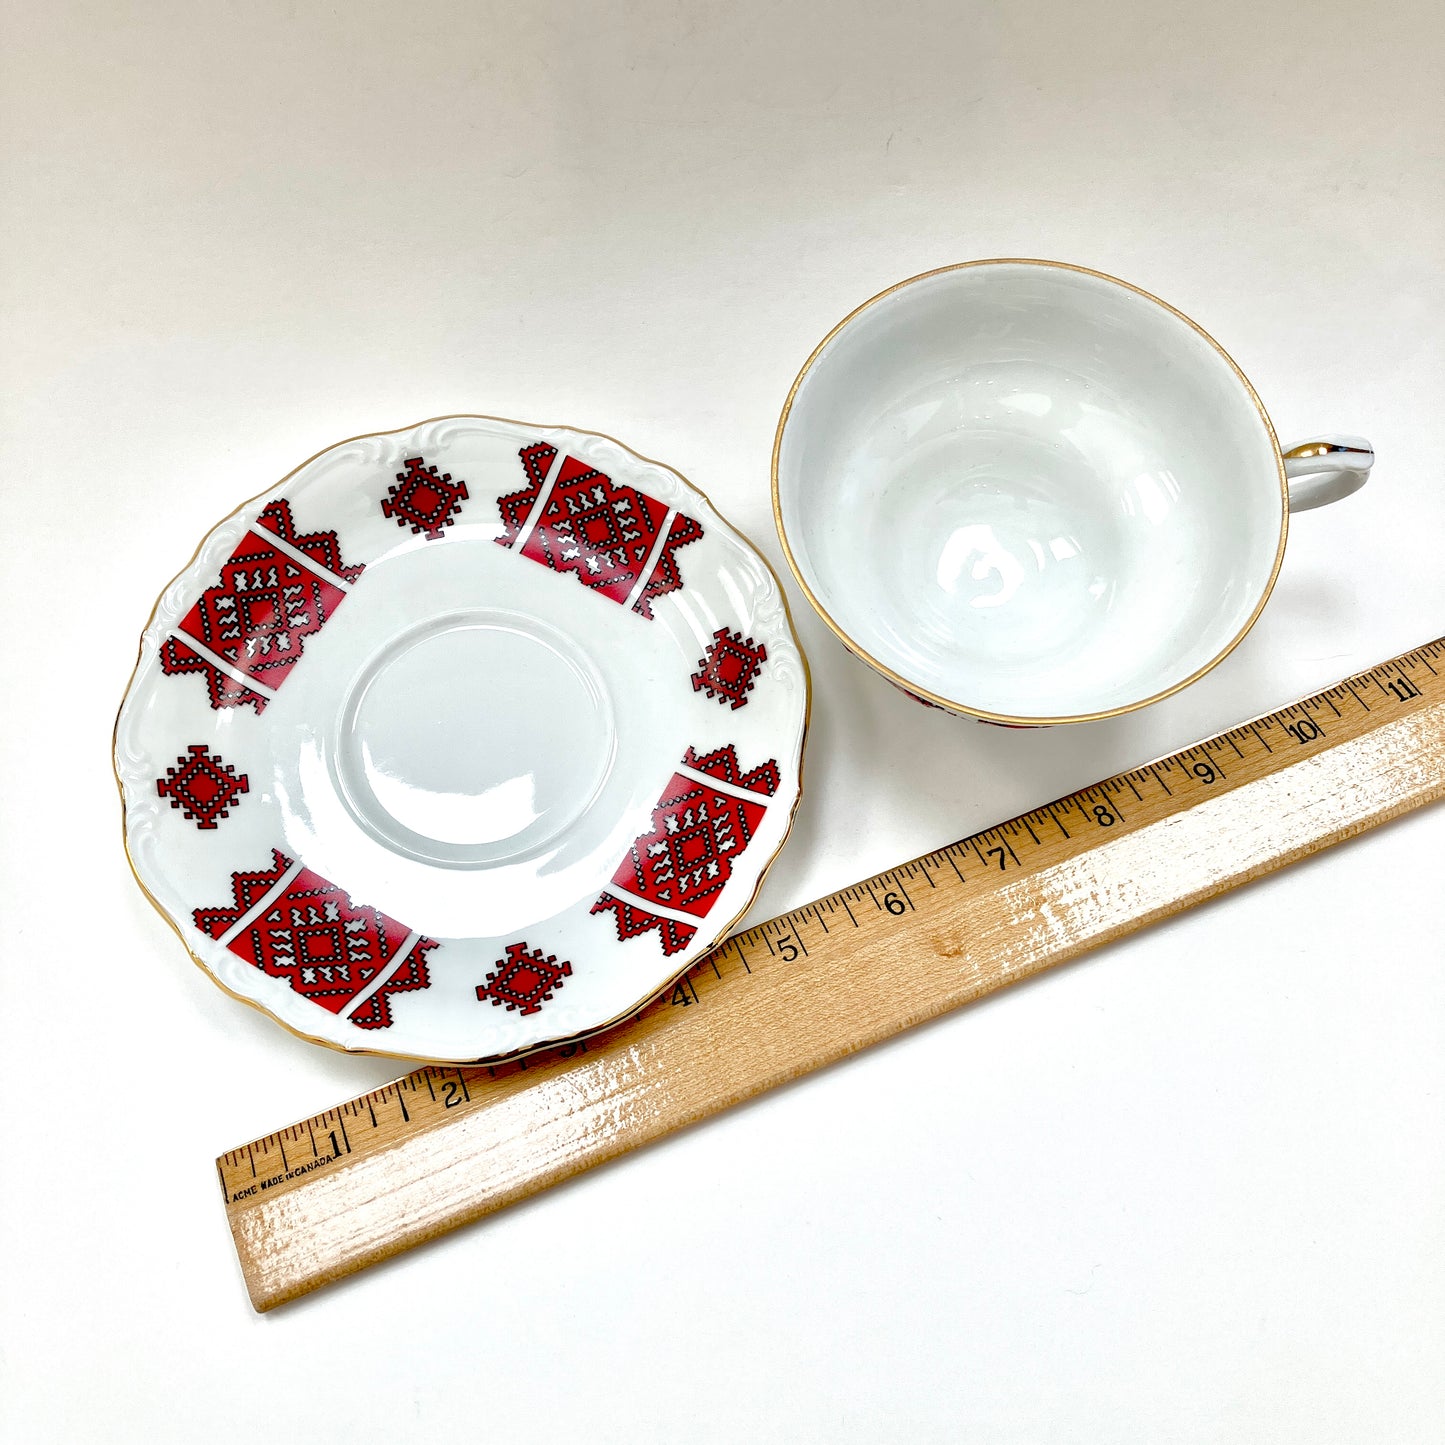 Edelstein, Ukrainian Cross Stitch Transfer Pattern, Cup and Saucer, Gold Trimmed, Vintage